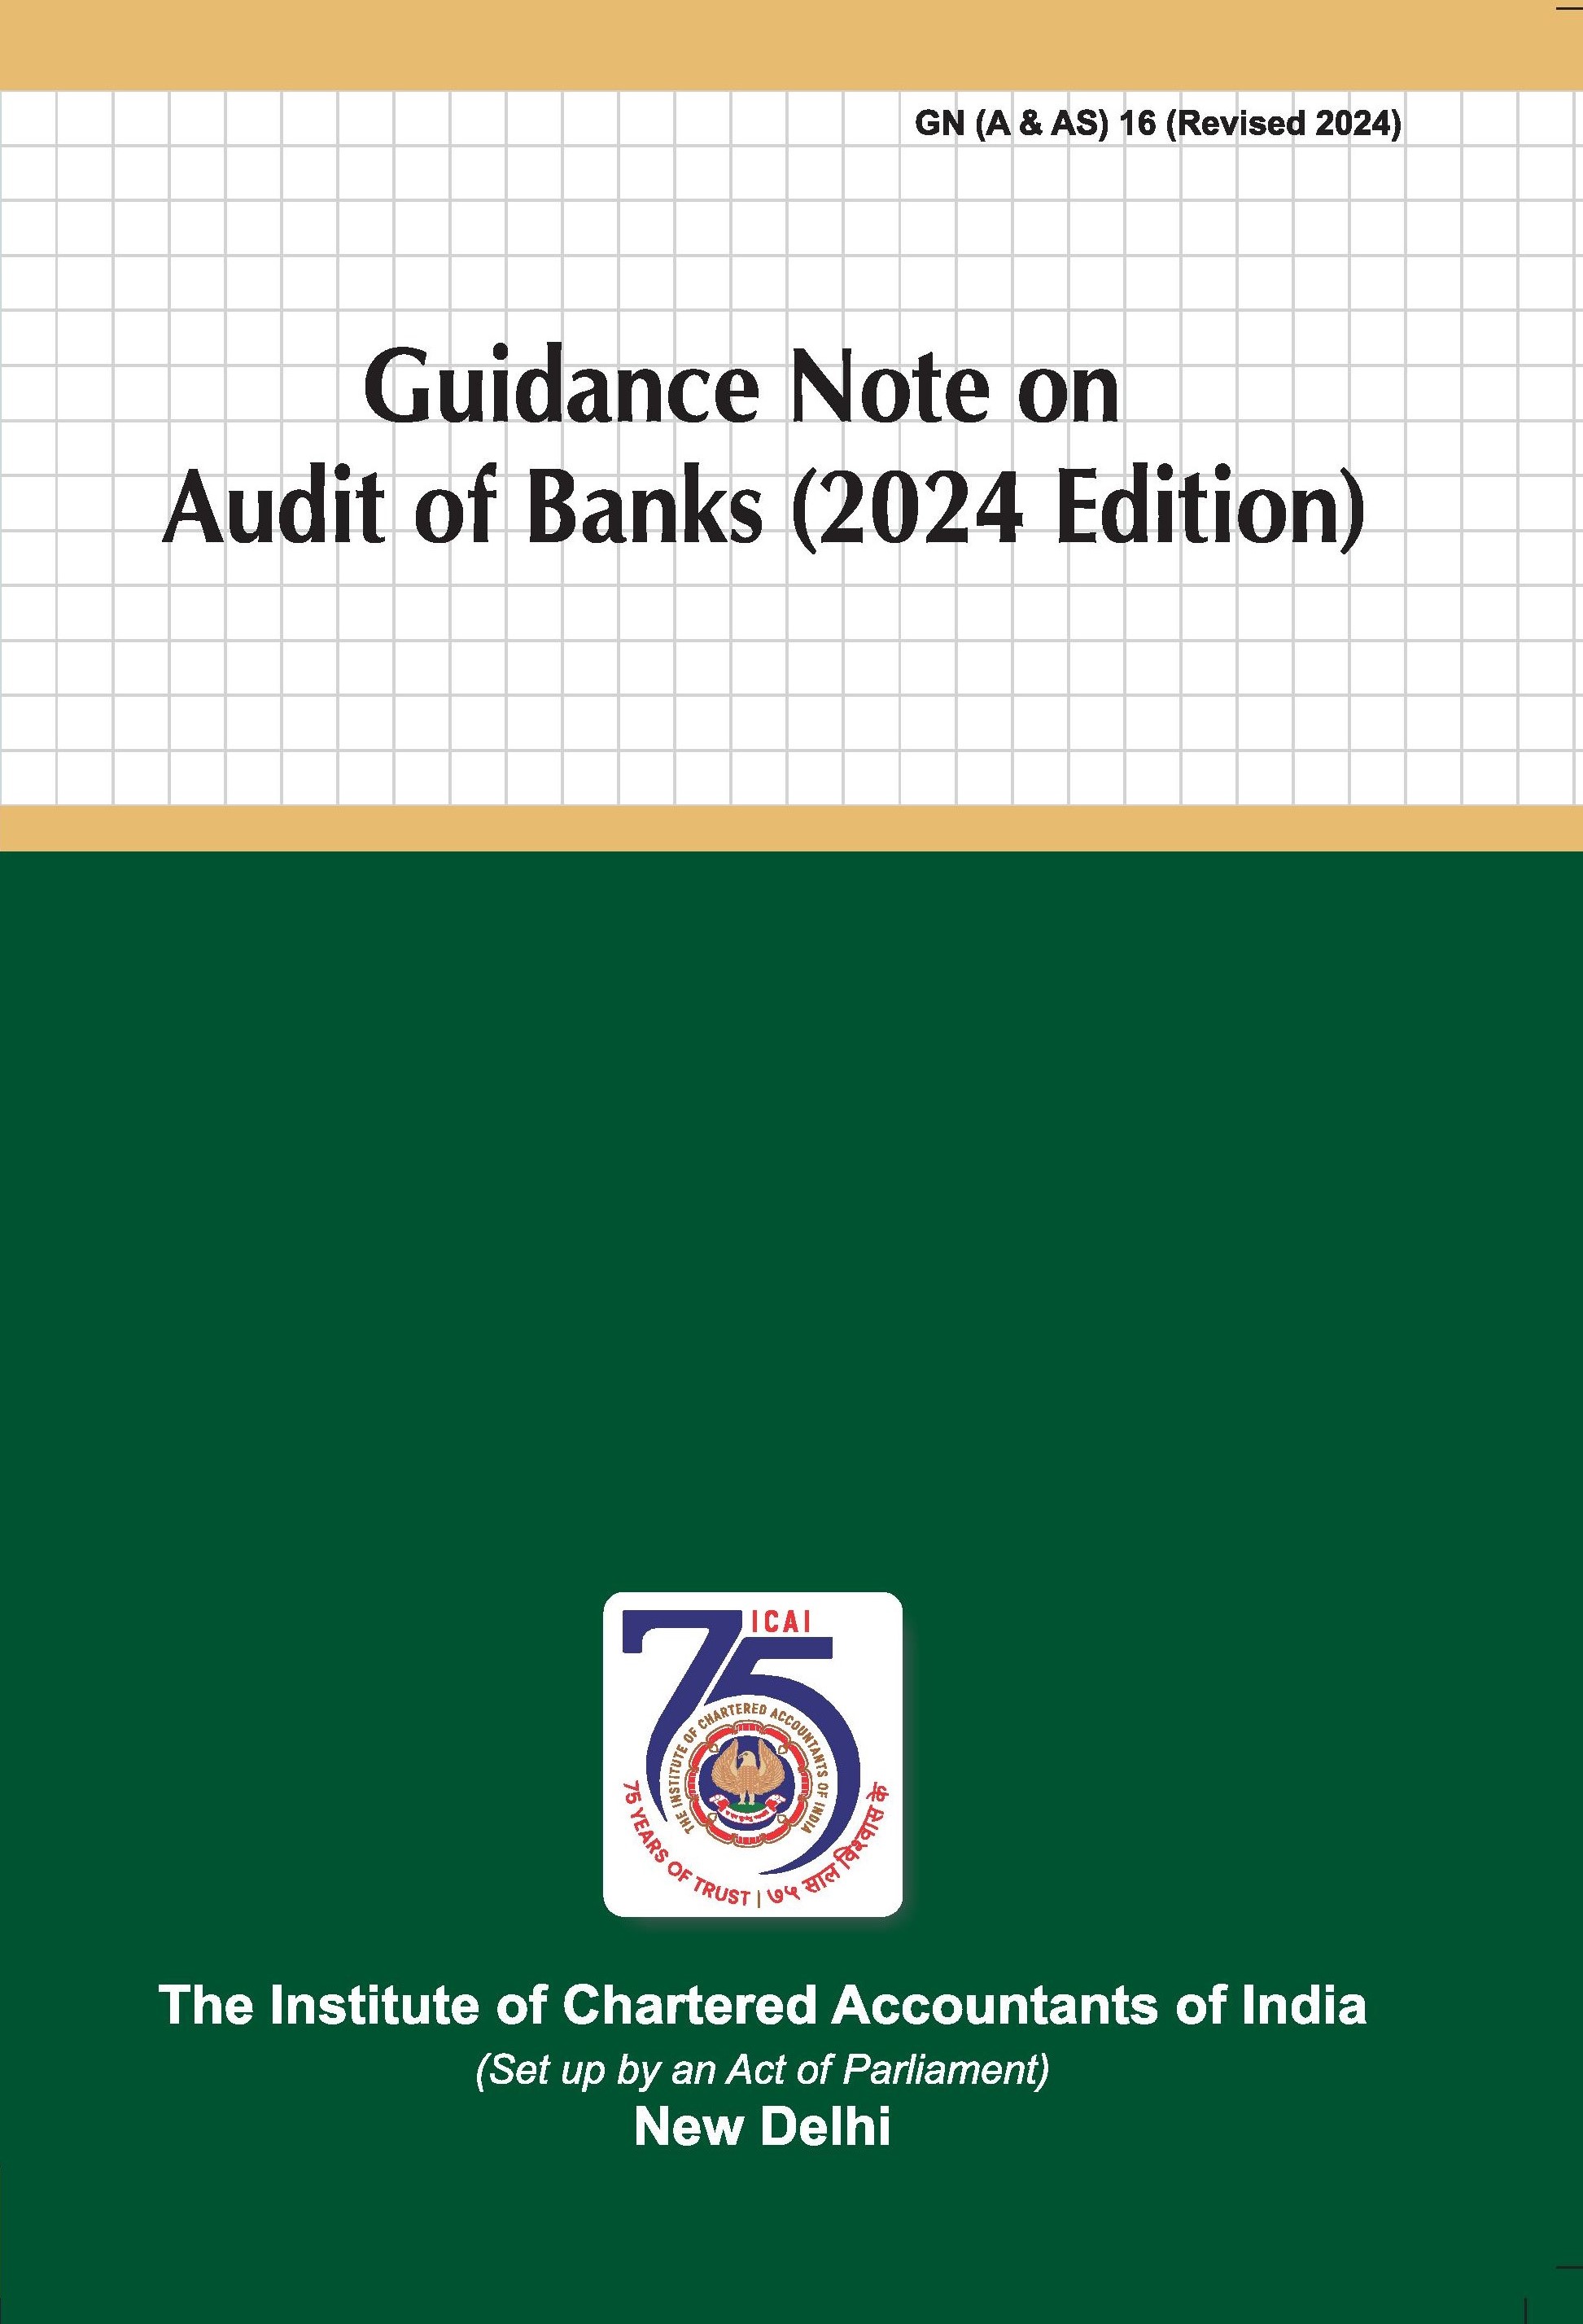 Guidance Note on Audit of Banks (Revised 2024 Edition)